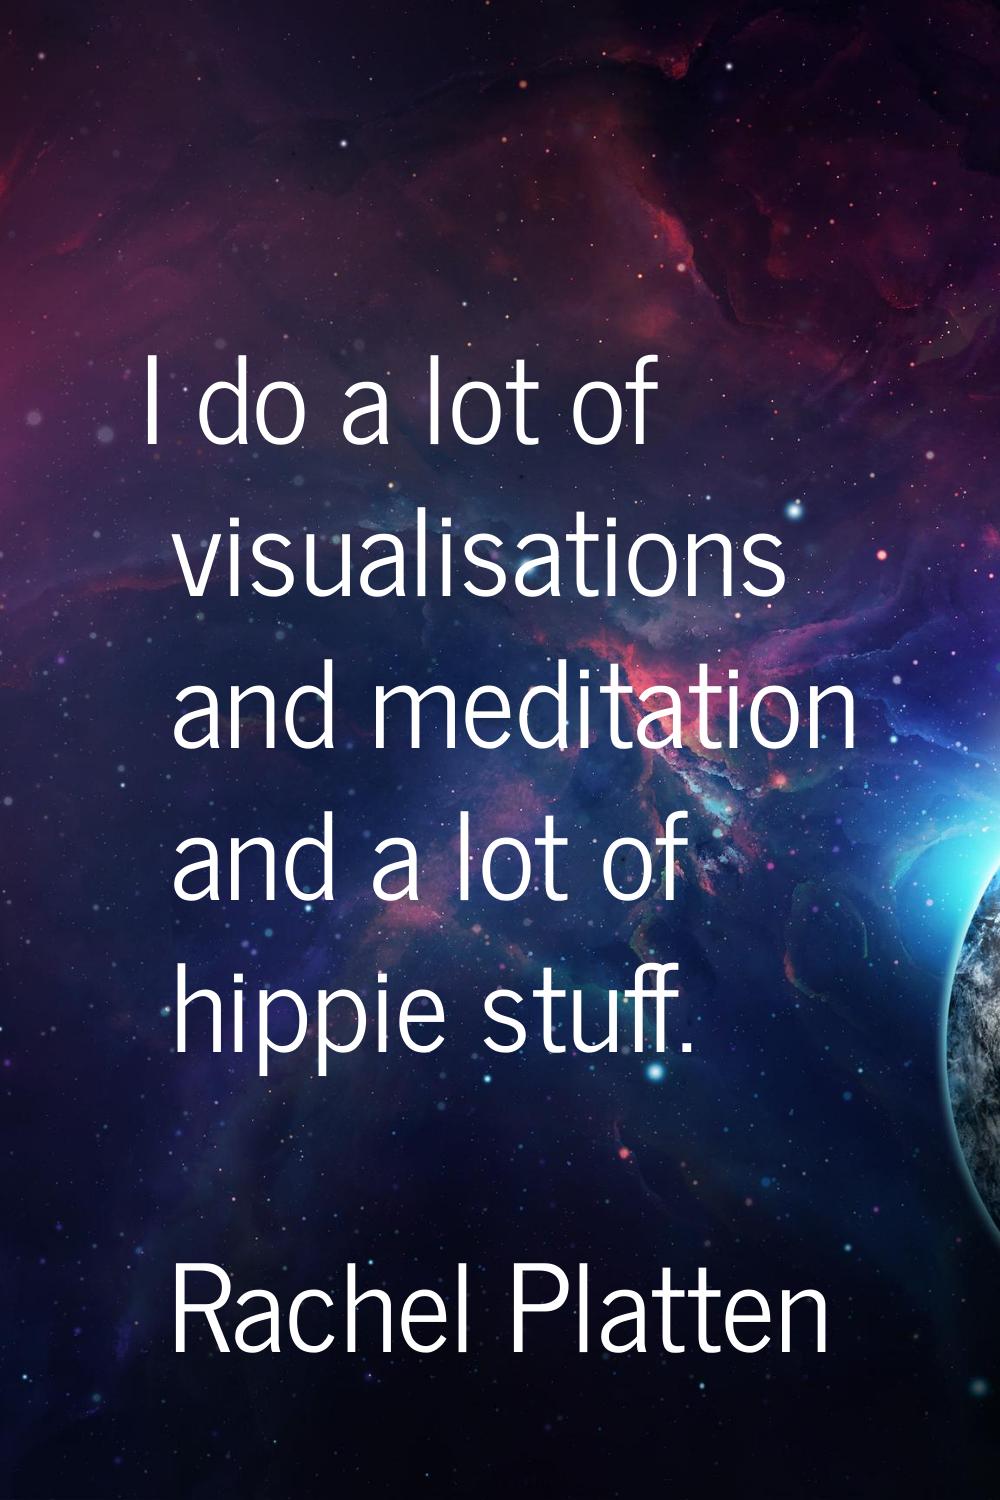 I do a lot of visualisations and meditation and a lot of hippie stuff.